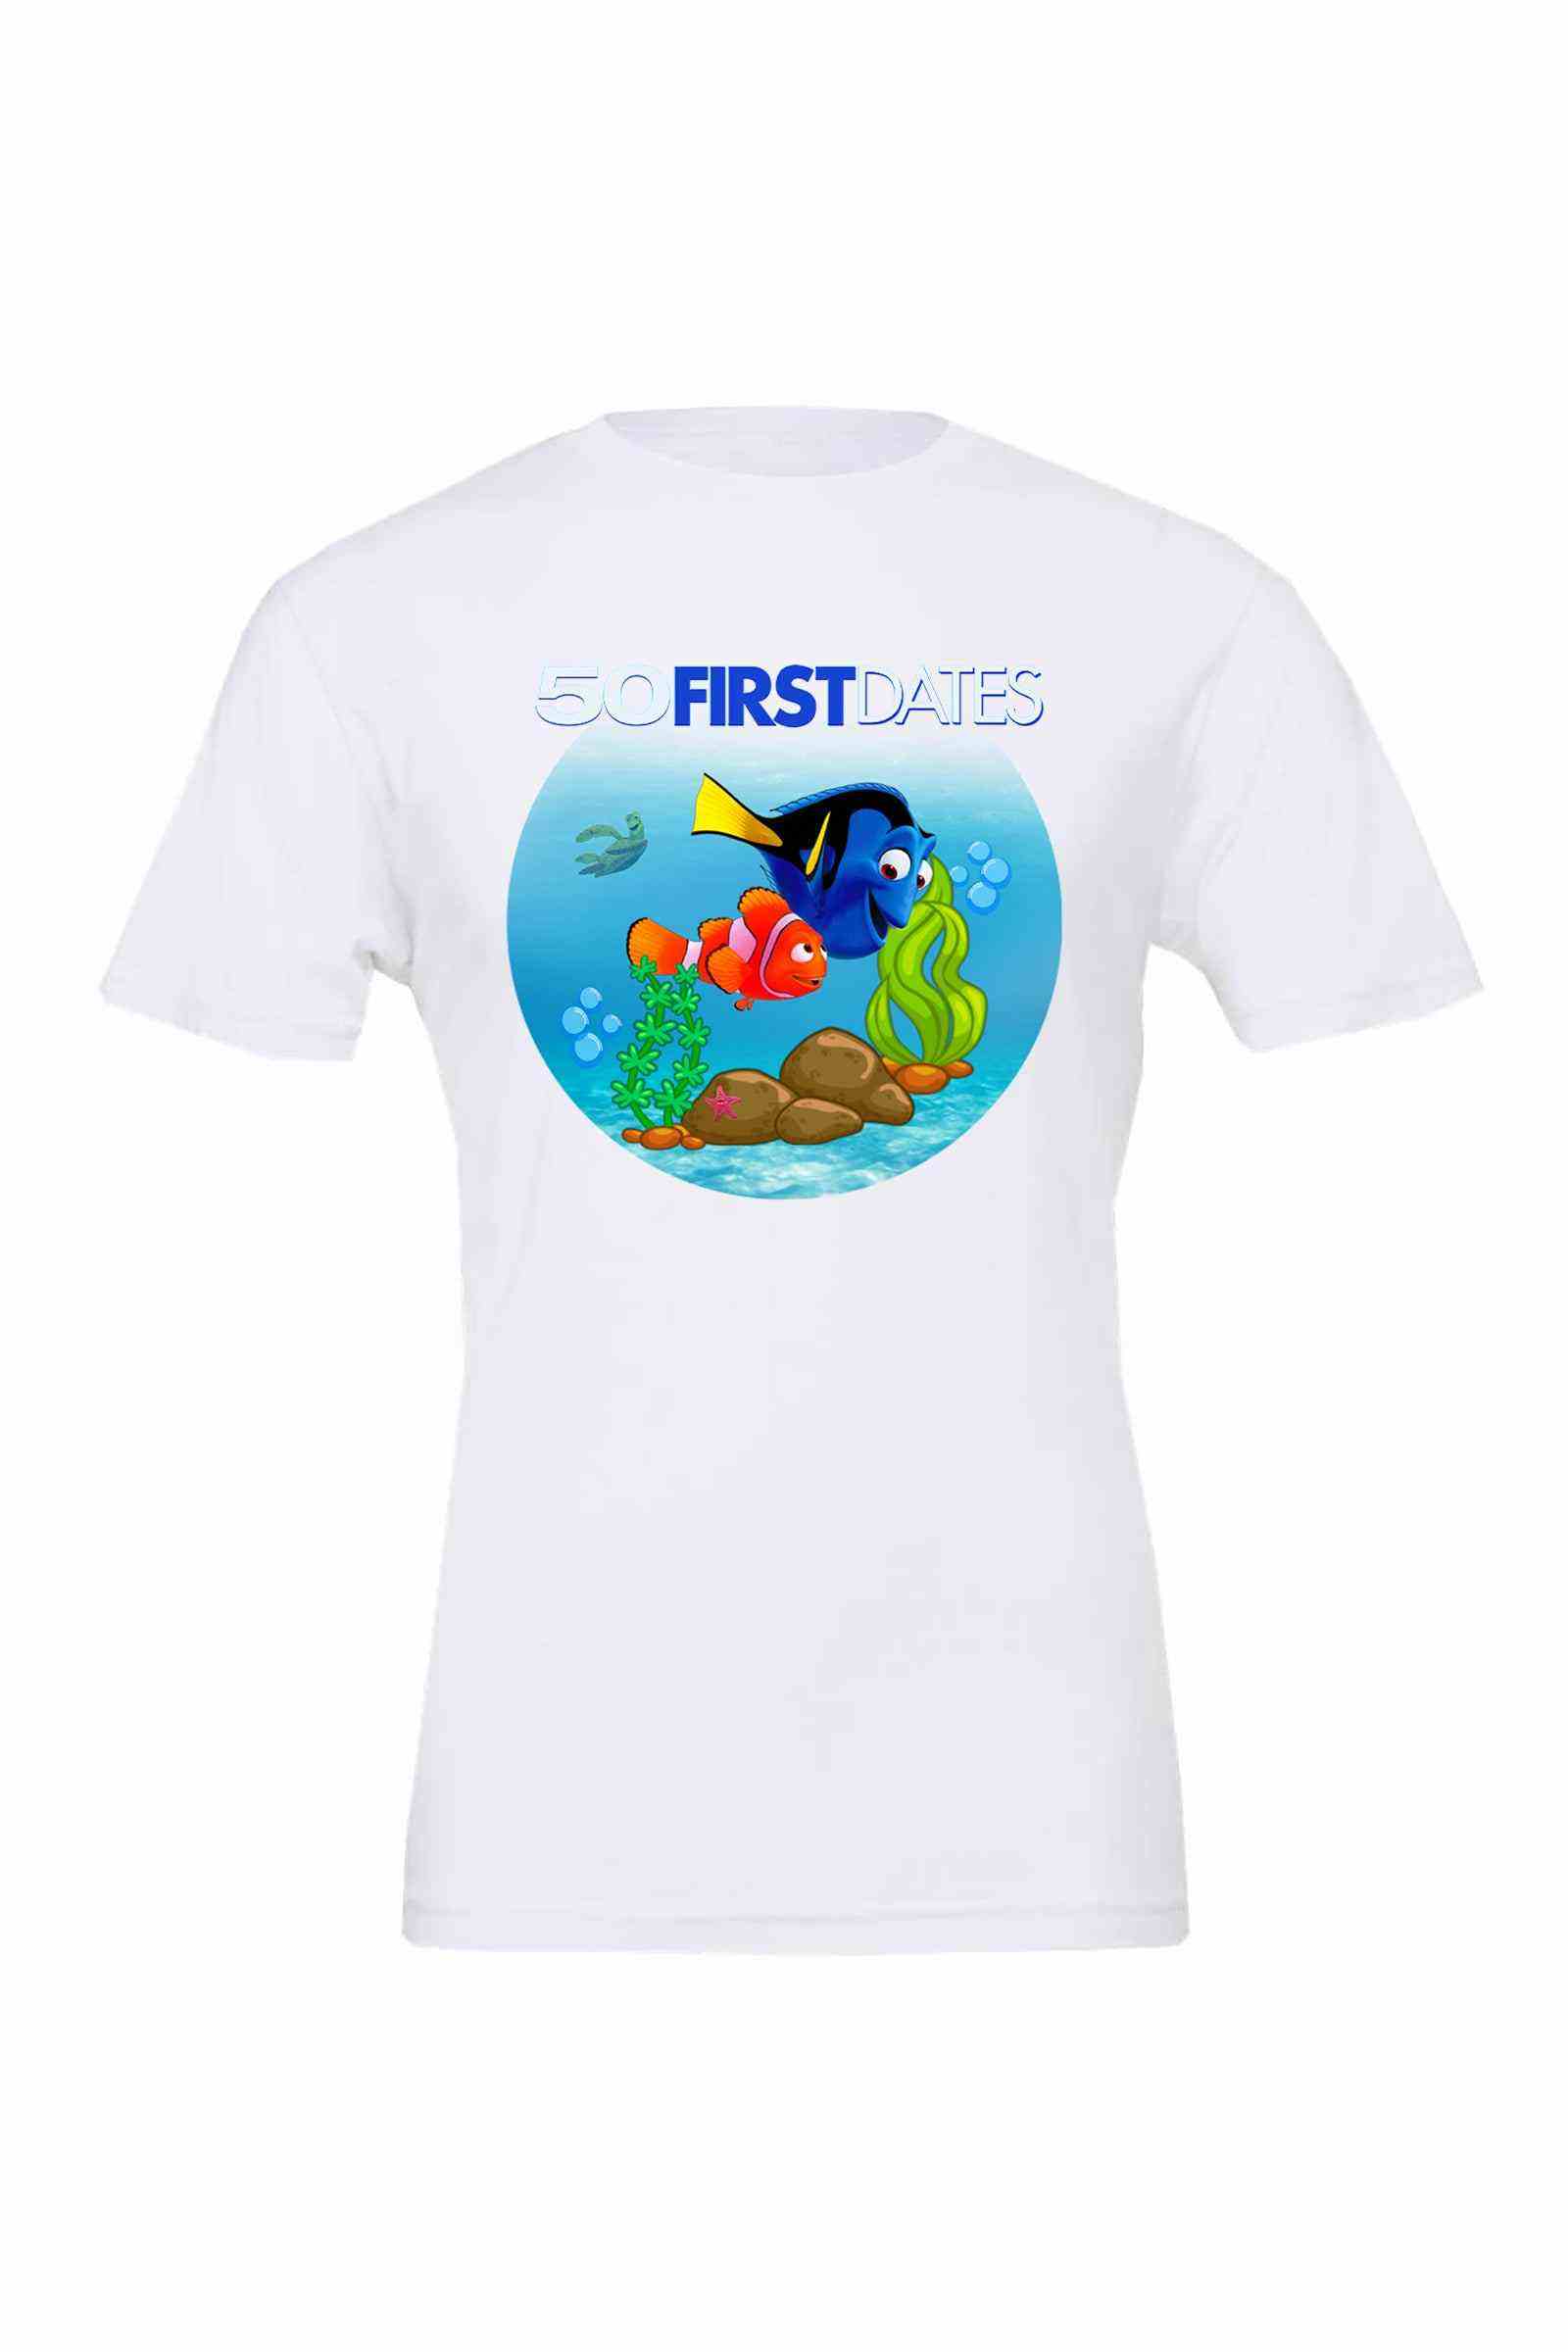 Youth | Fifty First Dates Dory Shirt | Nemo Shirt | Movie Shirt - Dylan's Tees